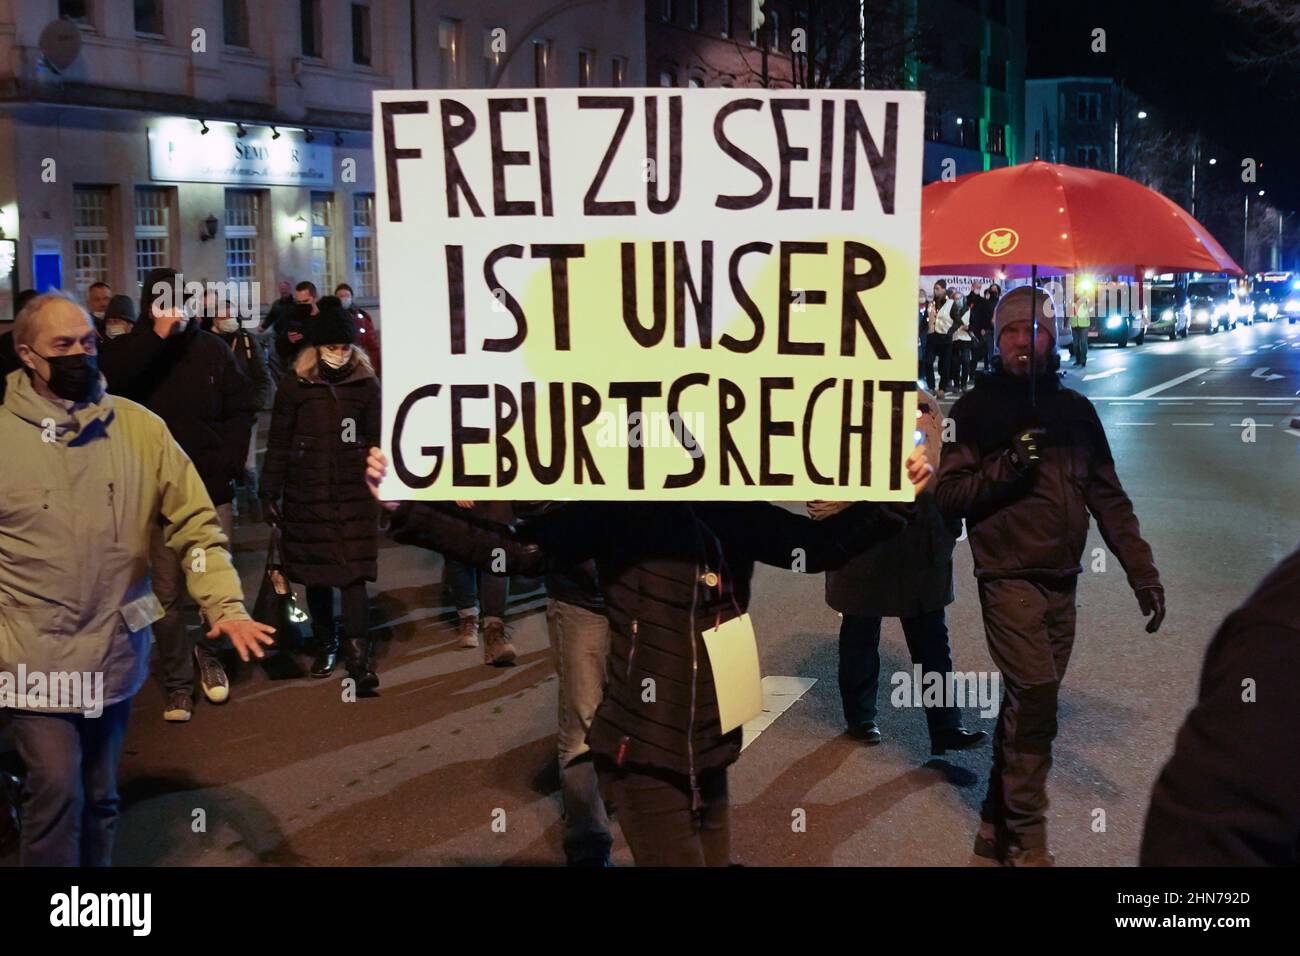 Dortmund, Germany, February 14th, 2022: Opponents of the corona protection measures march through the city center of Dortmund on Monday evening at an approved demonstration.   ---   Dortmund, 14.2.2022: Gegner der Corona-Schutzmaßnahmen ziehen am Montagabend bei einer genehmigten Demonstration durch die Dortmunder Innenstadt. Stock Photo